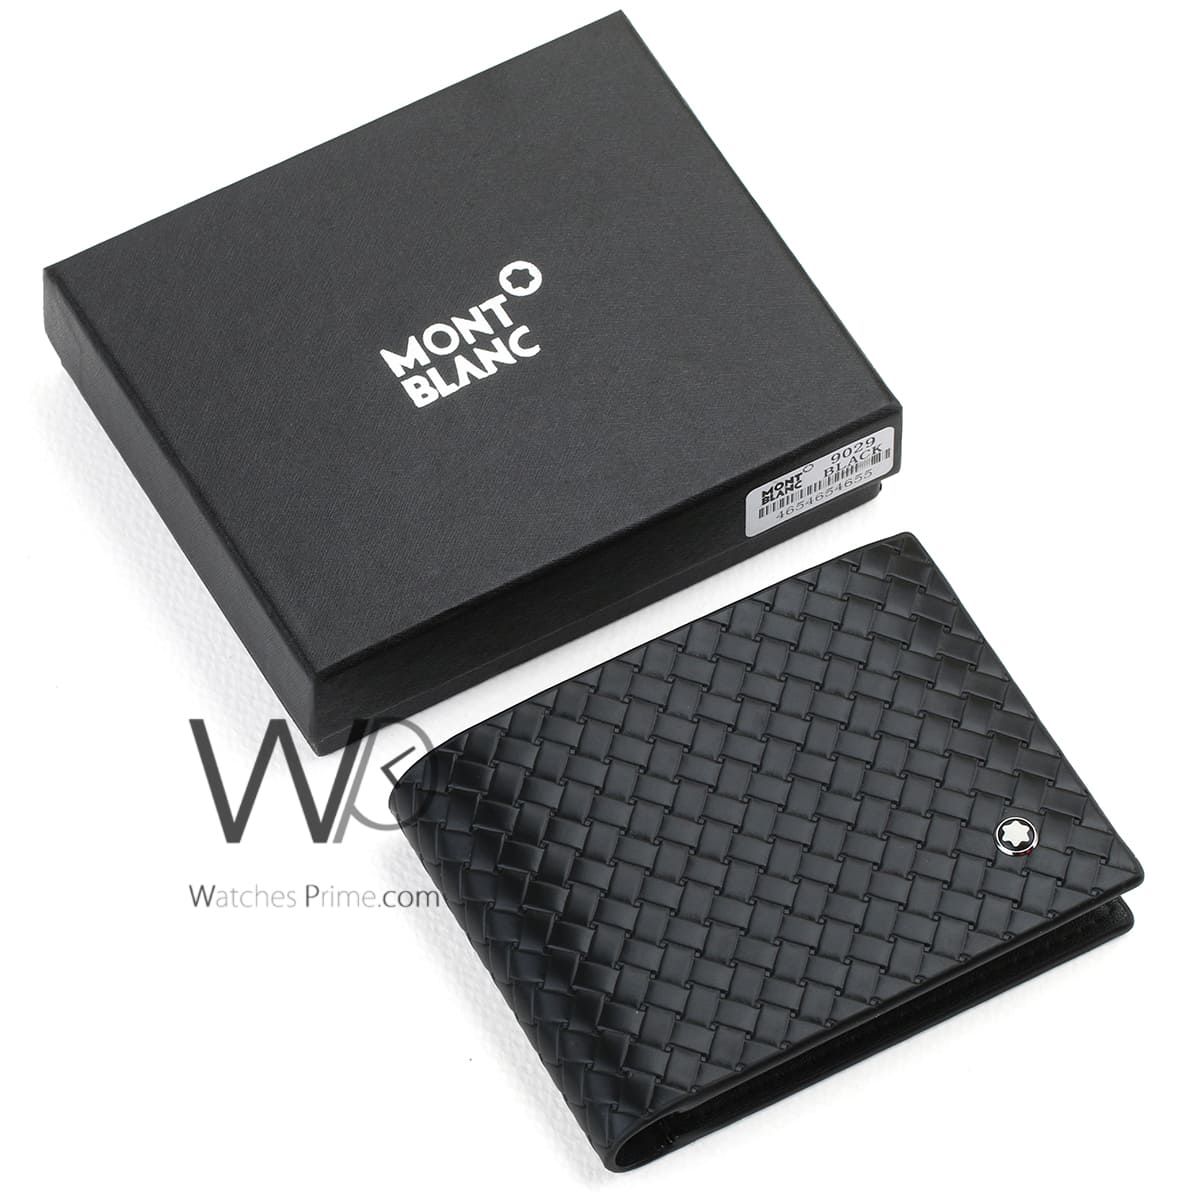 Mont blanc Wallet Leather Black For Men | Watches Prime